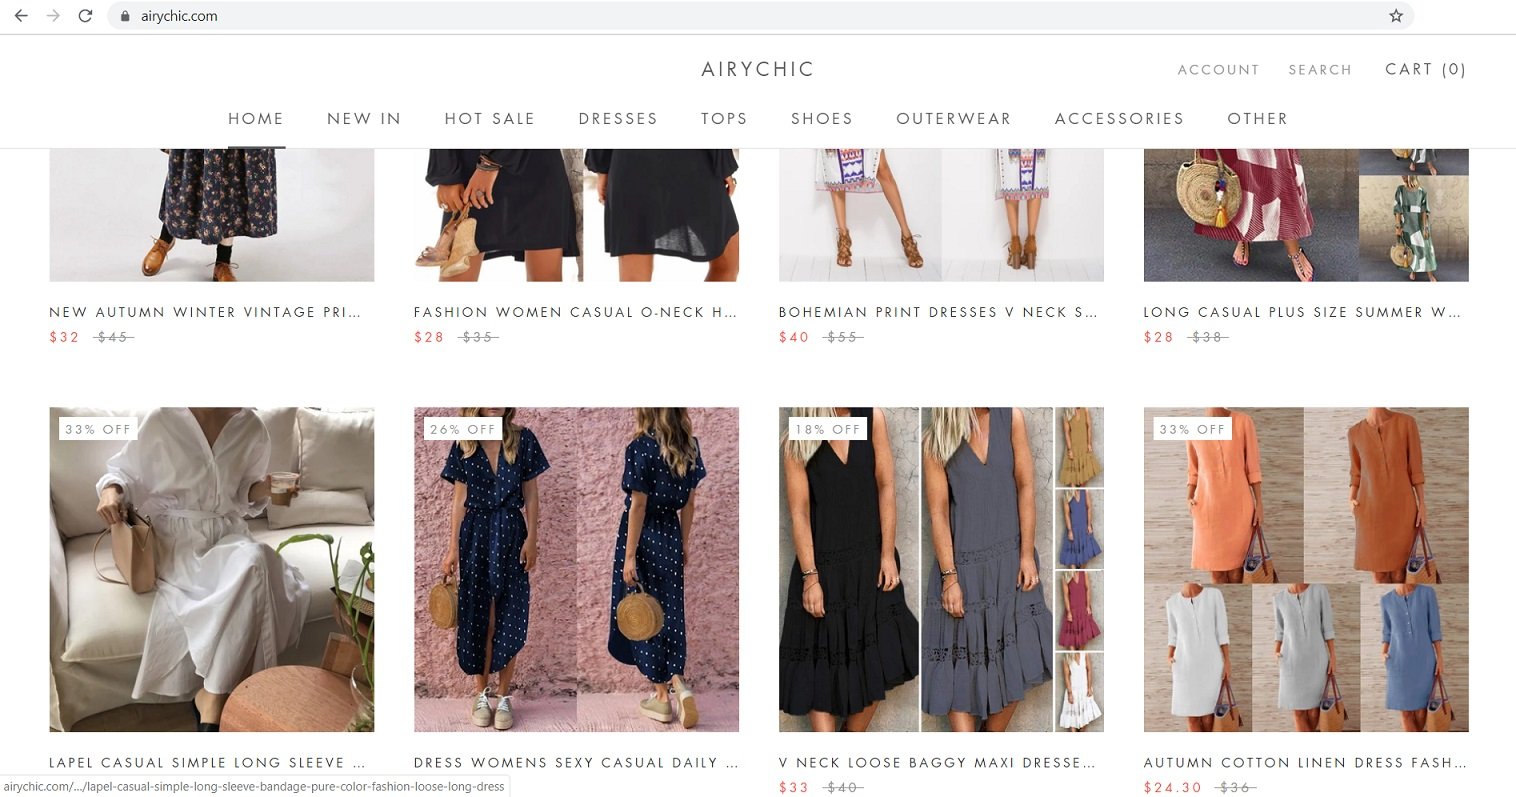 Airychic at airychic.com